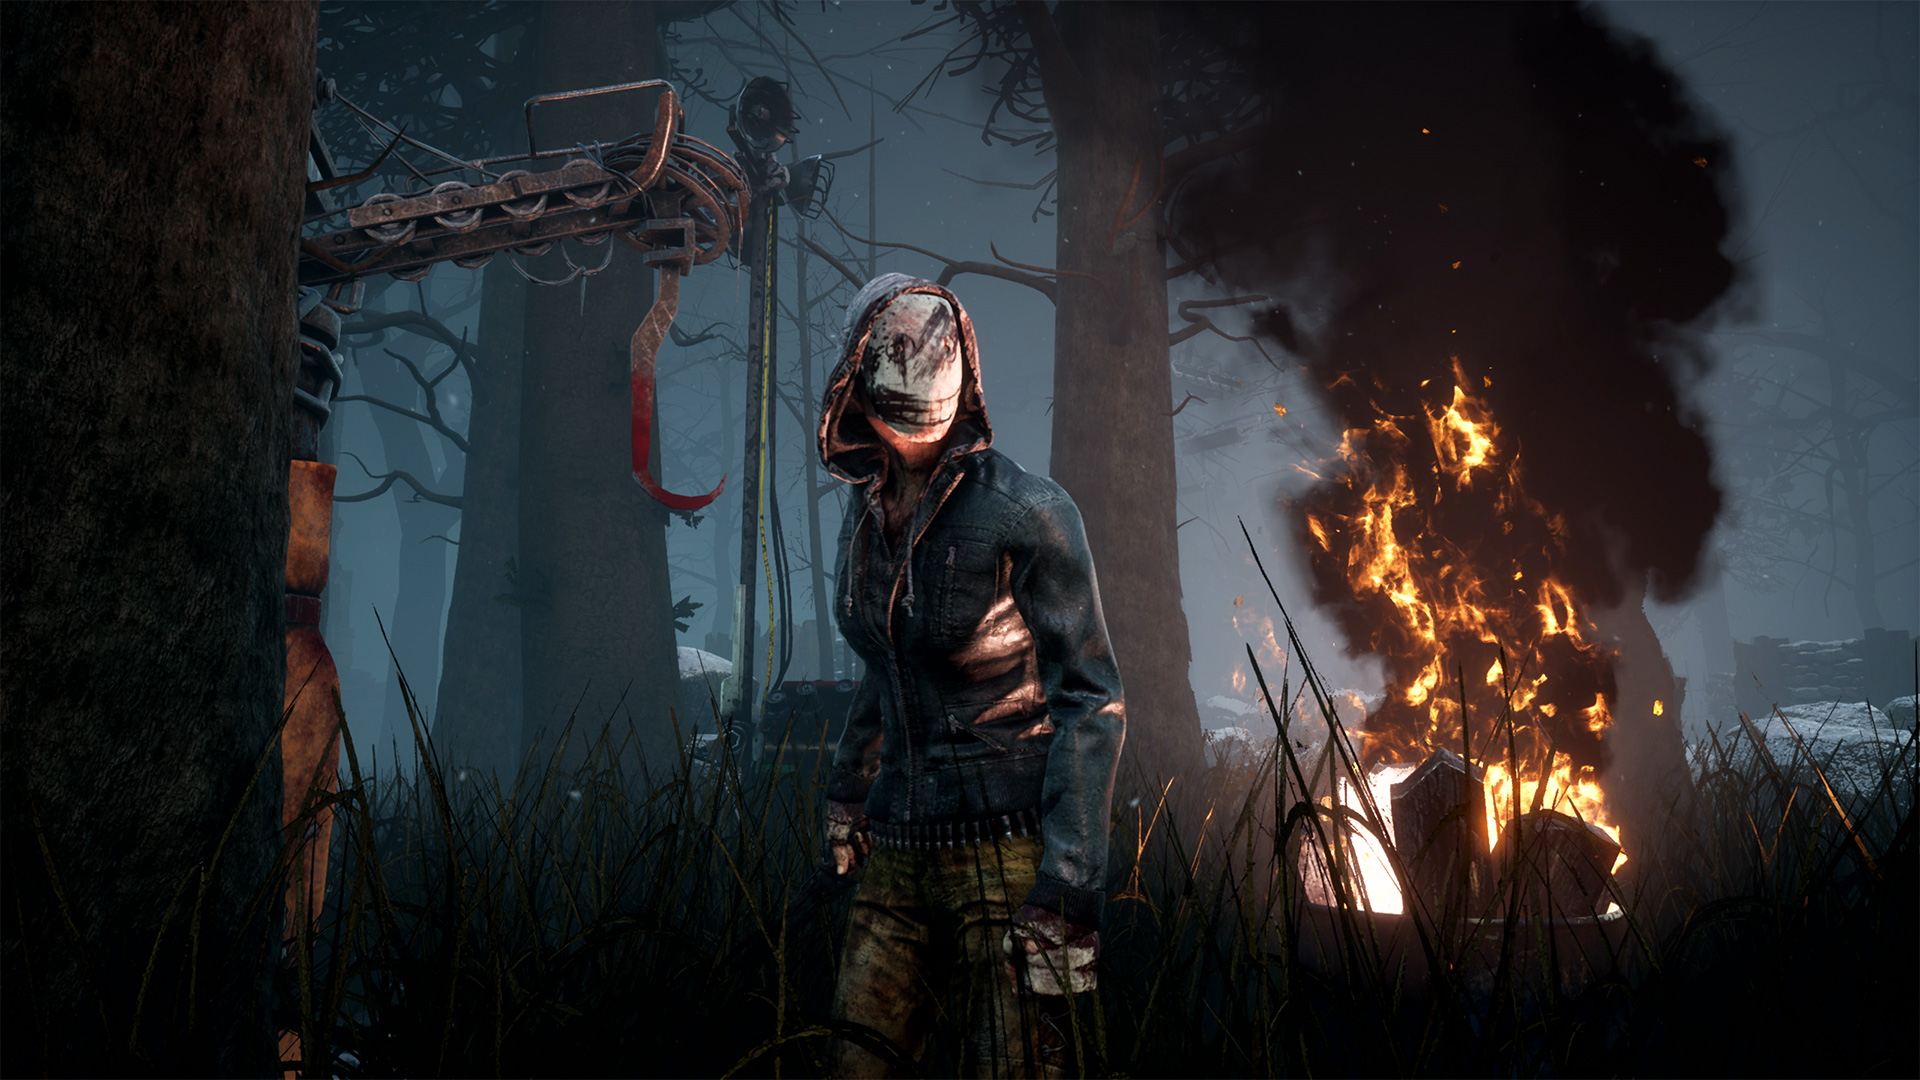 Dead By Daylight Crossplay How To Add Friends Cross Platform Mobile Crossplay And More The Loadout